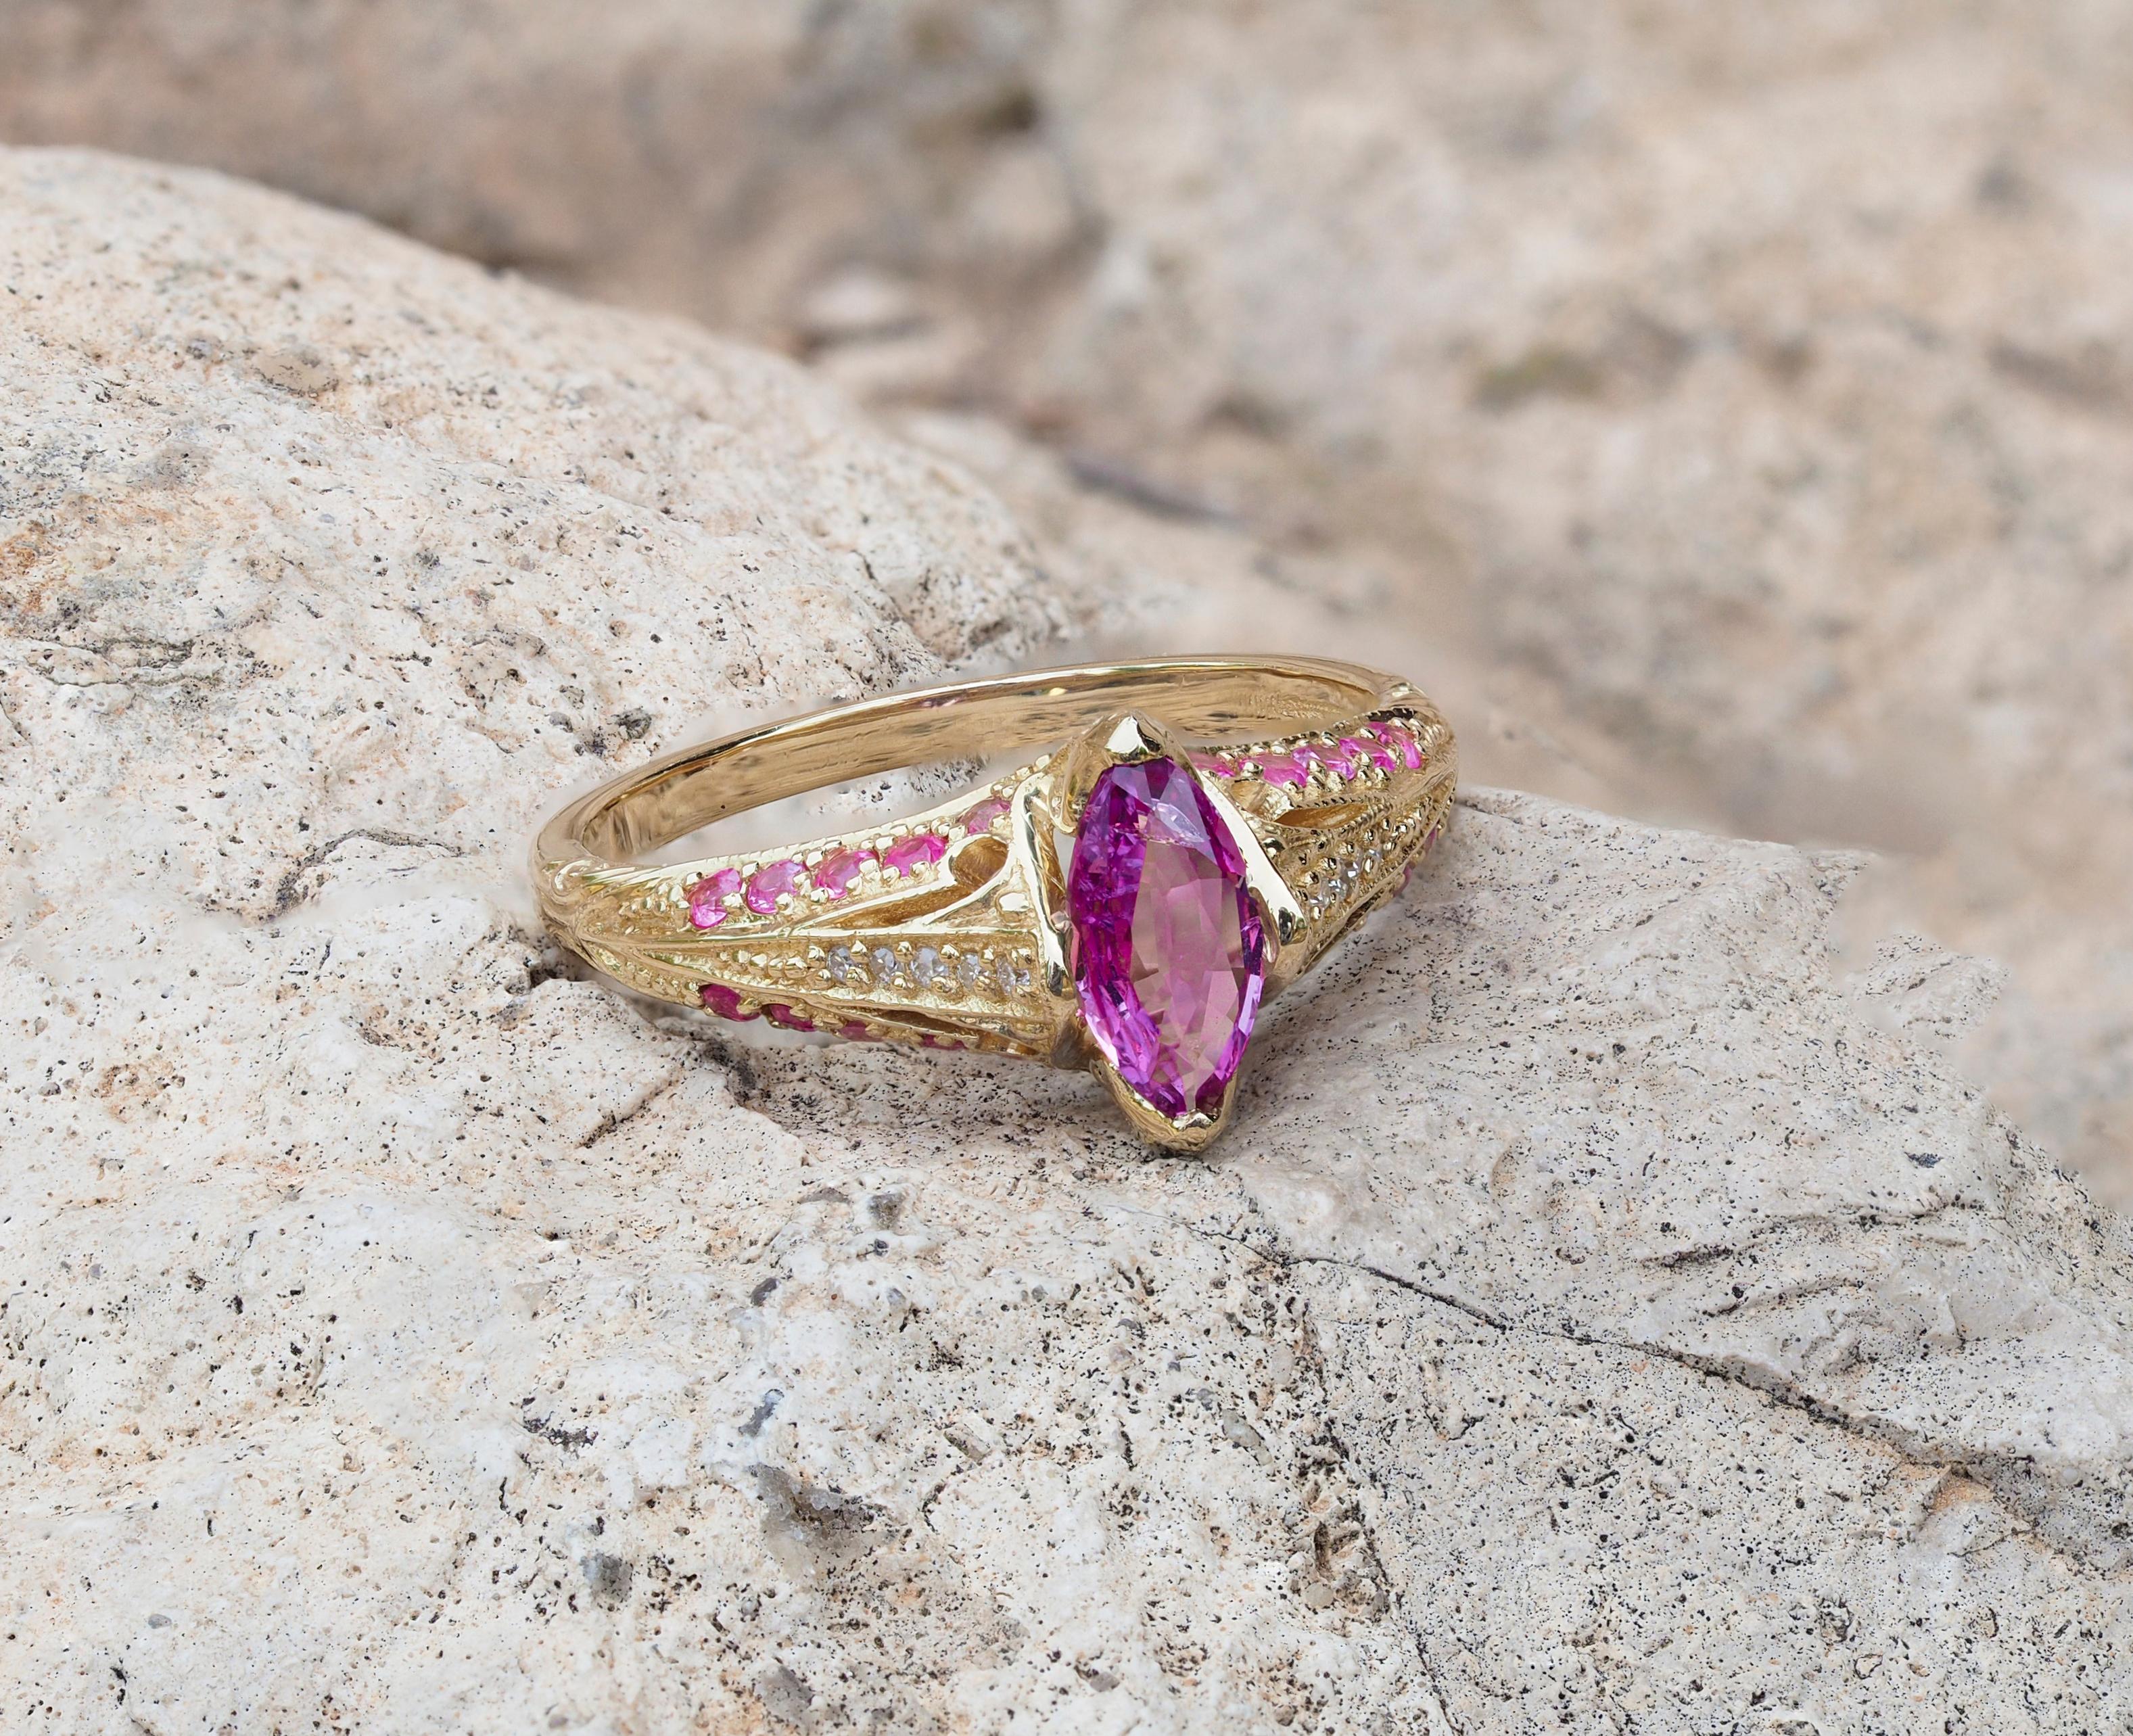 For Sale:  14k gold ring with pink sapphire. Marquise sapphire ring 7